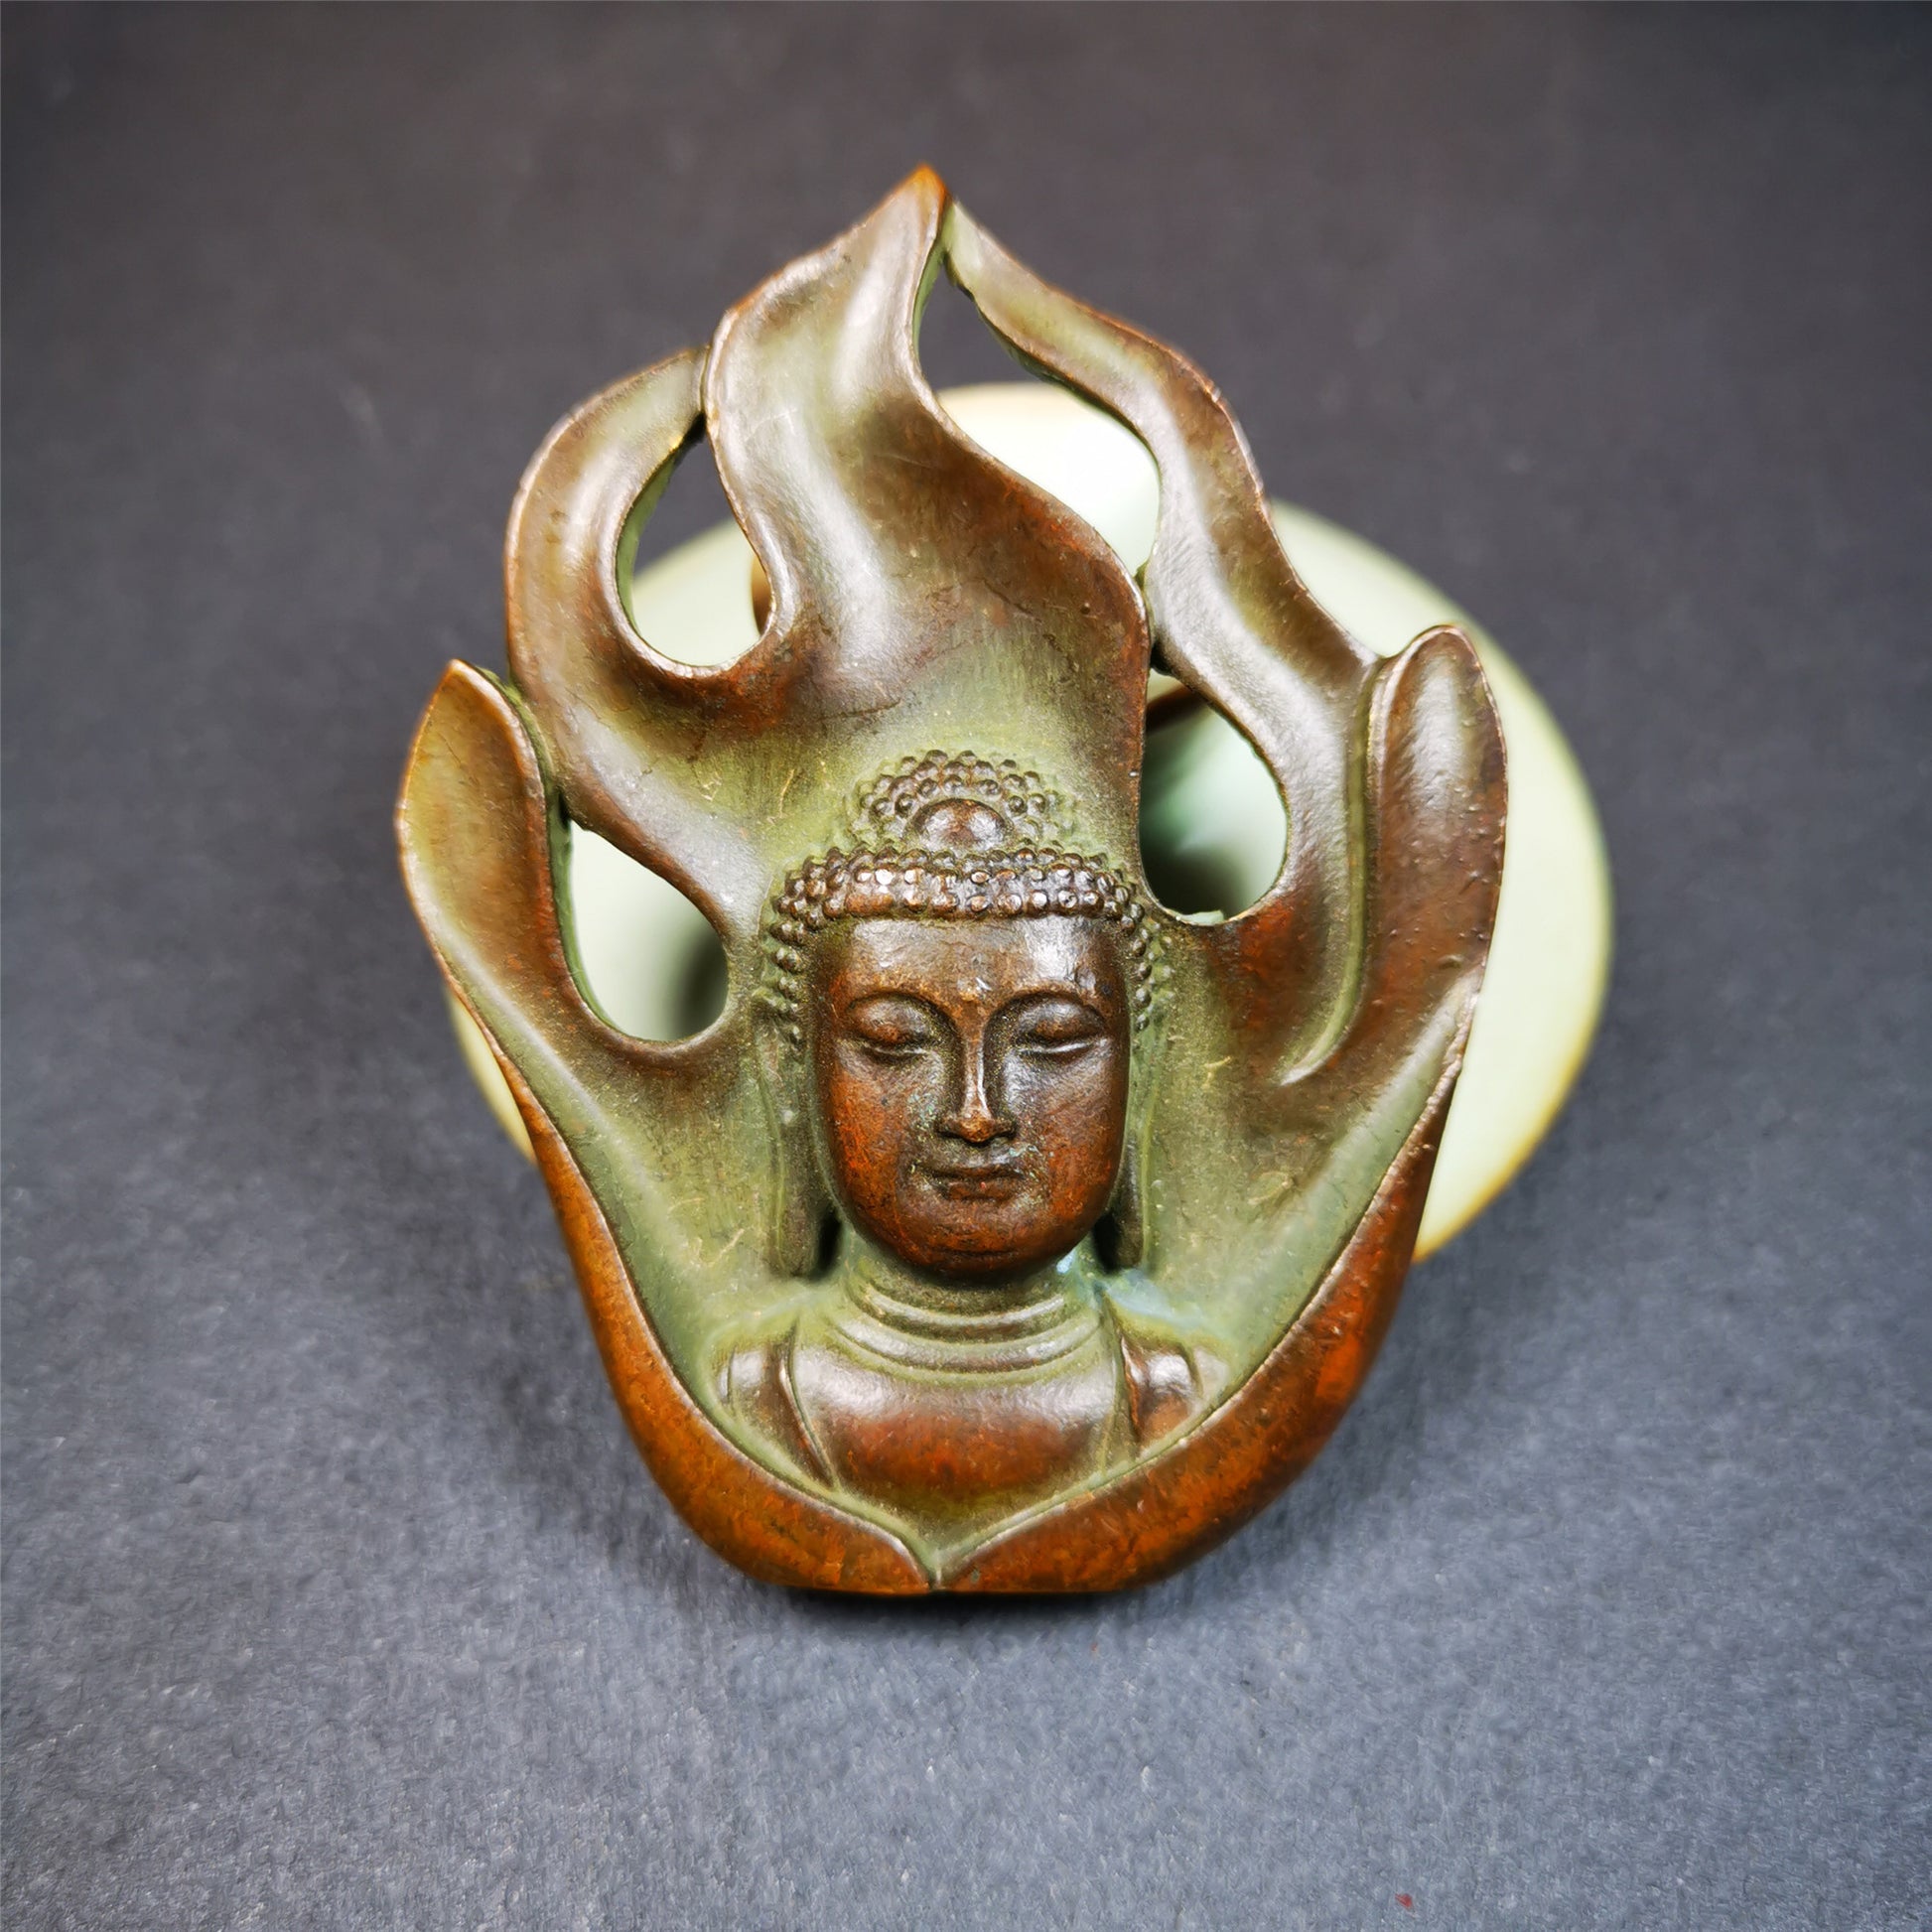 This shakyamuni statue was handmade from Baiyu Tibet. It is made of copper,the flame surrounds shakyamuni,the height is 2.9 inches,width is 1.85 inches.